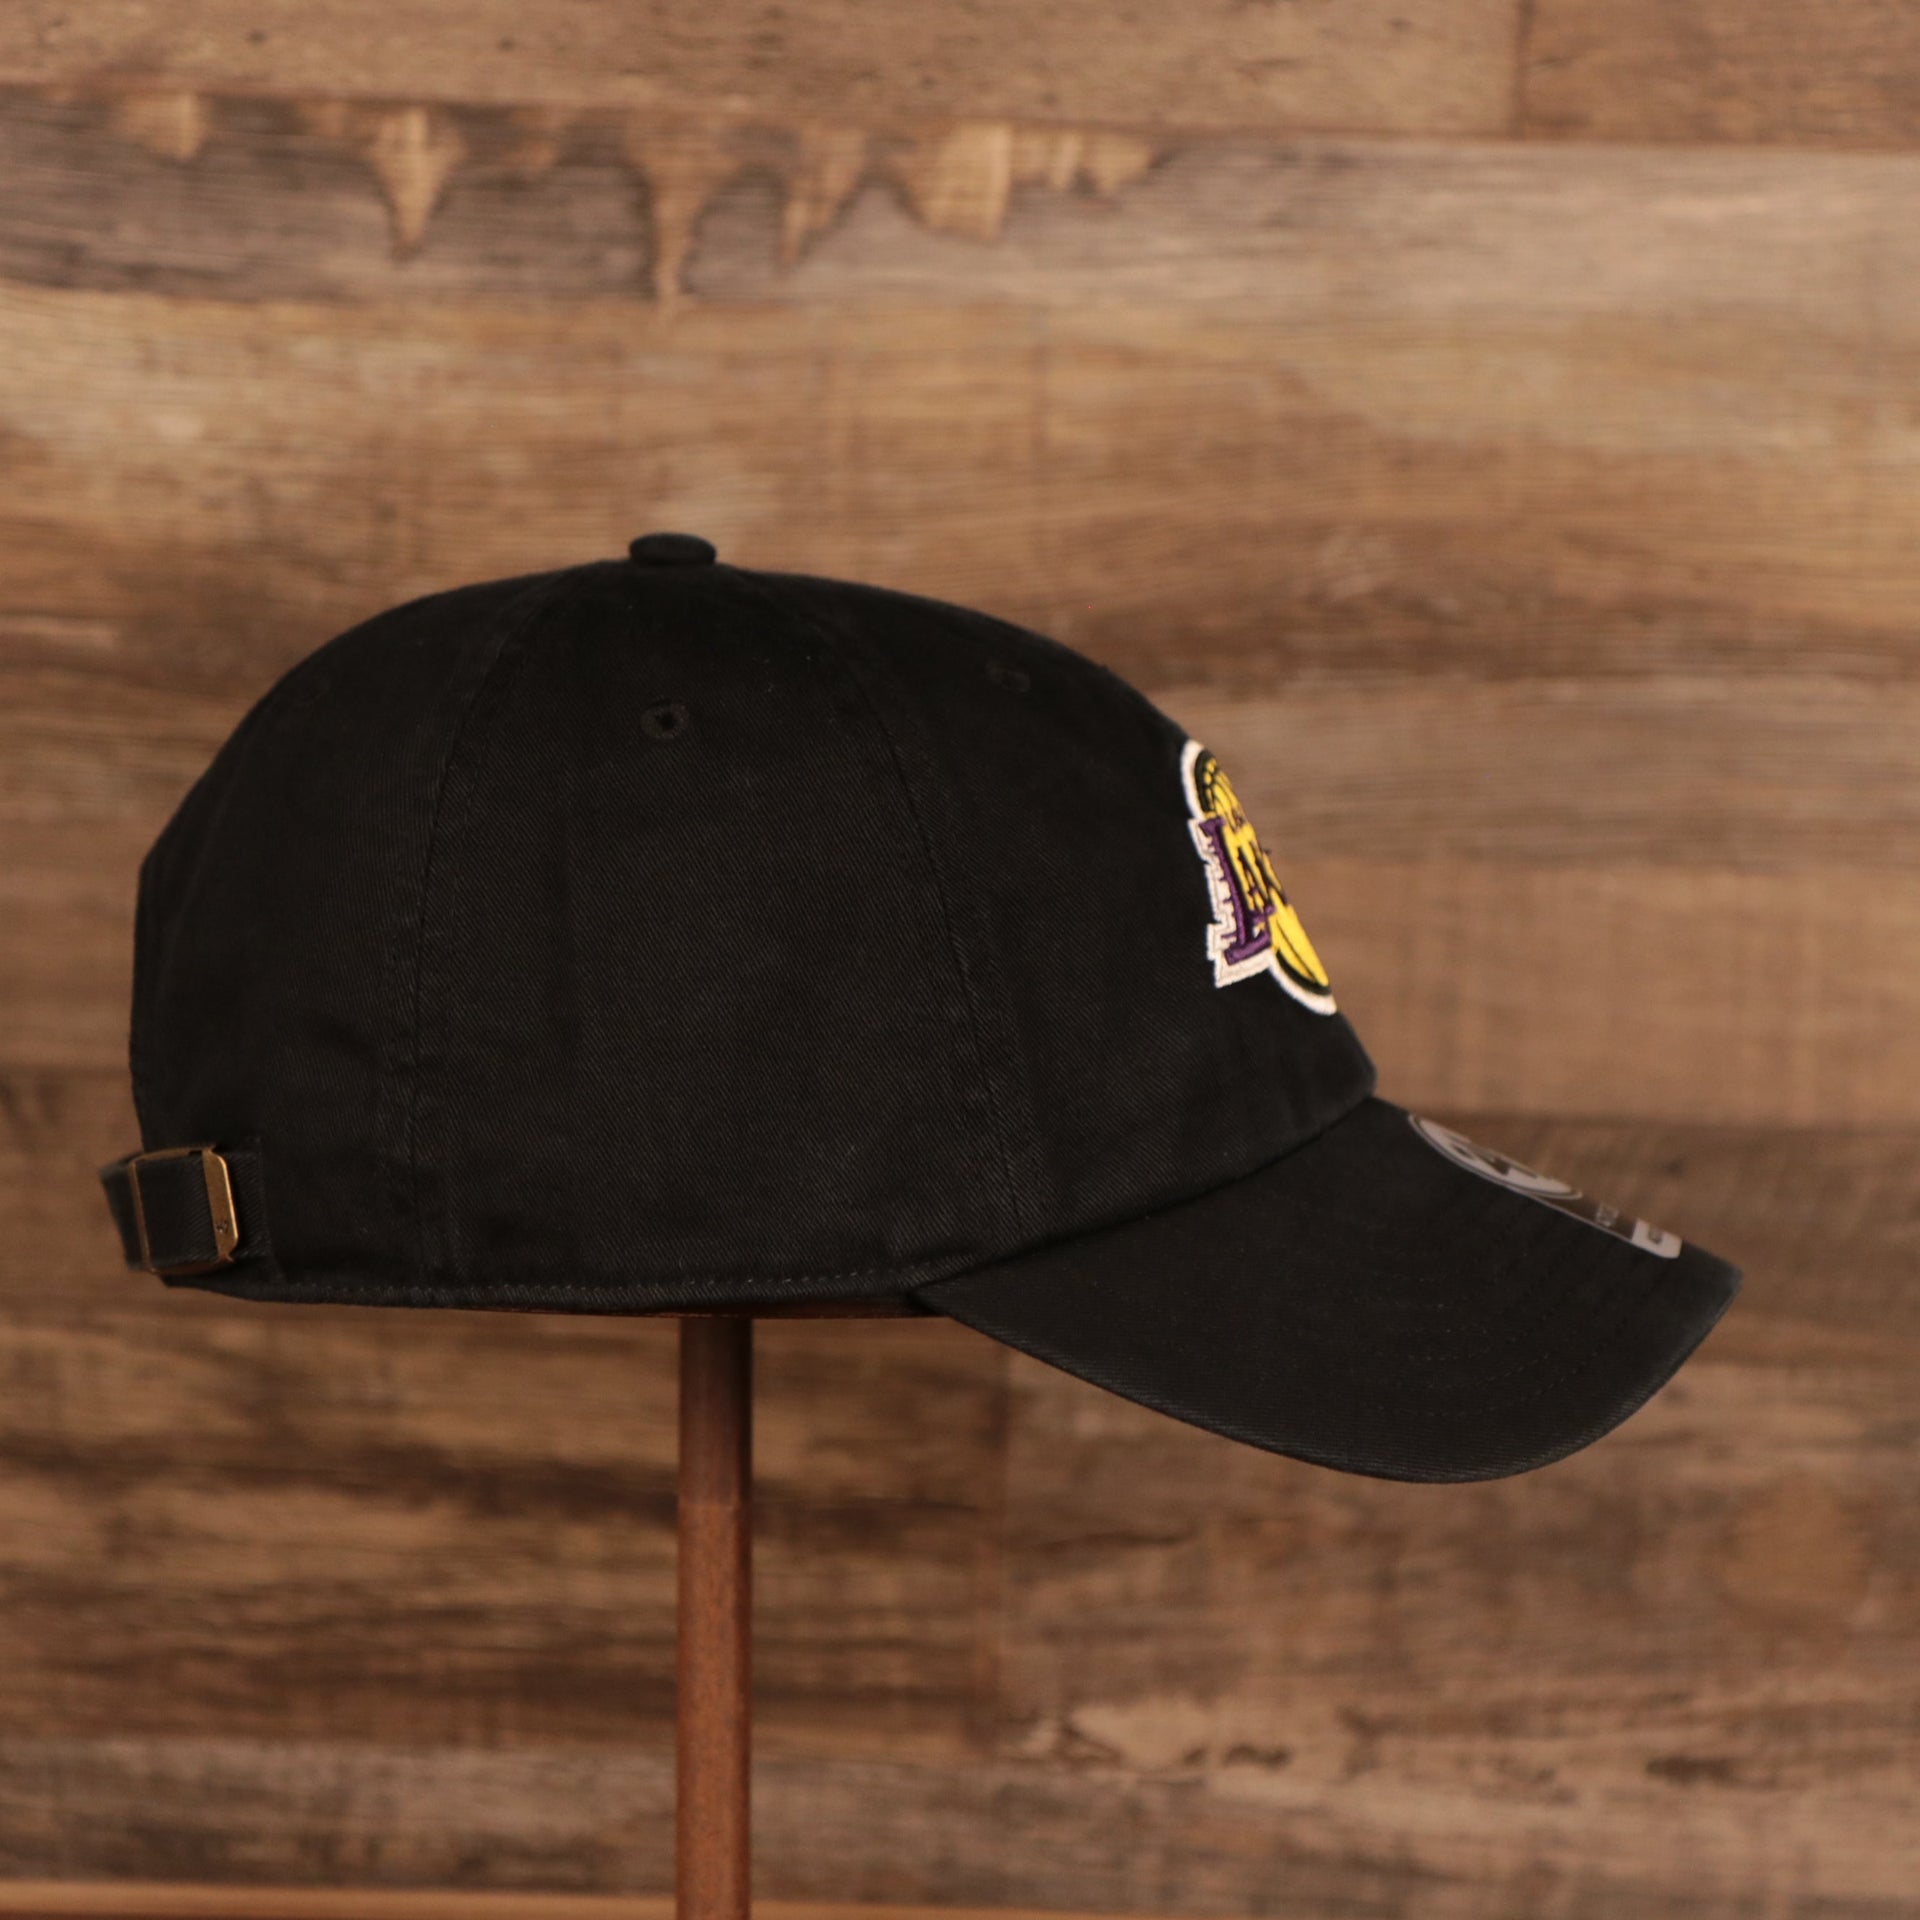 wearers right side of the Los Angeles Lakers Black Adjustable Dad Hat